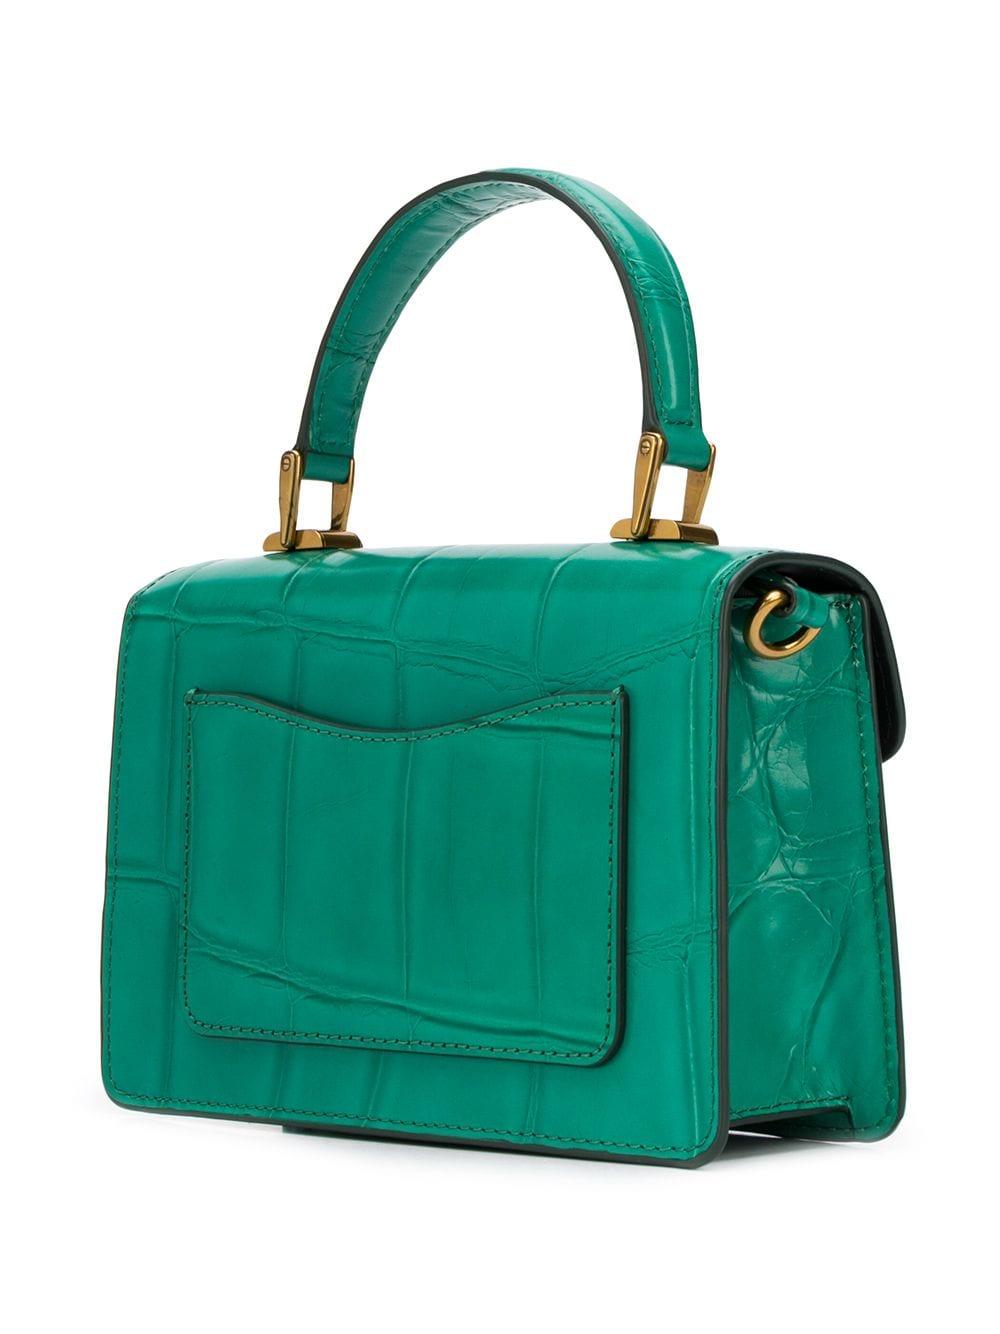 Marc Jacobs Leather The Downtown Crocodile-embossed Bag in Green - Lyst